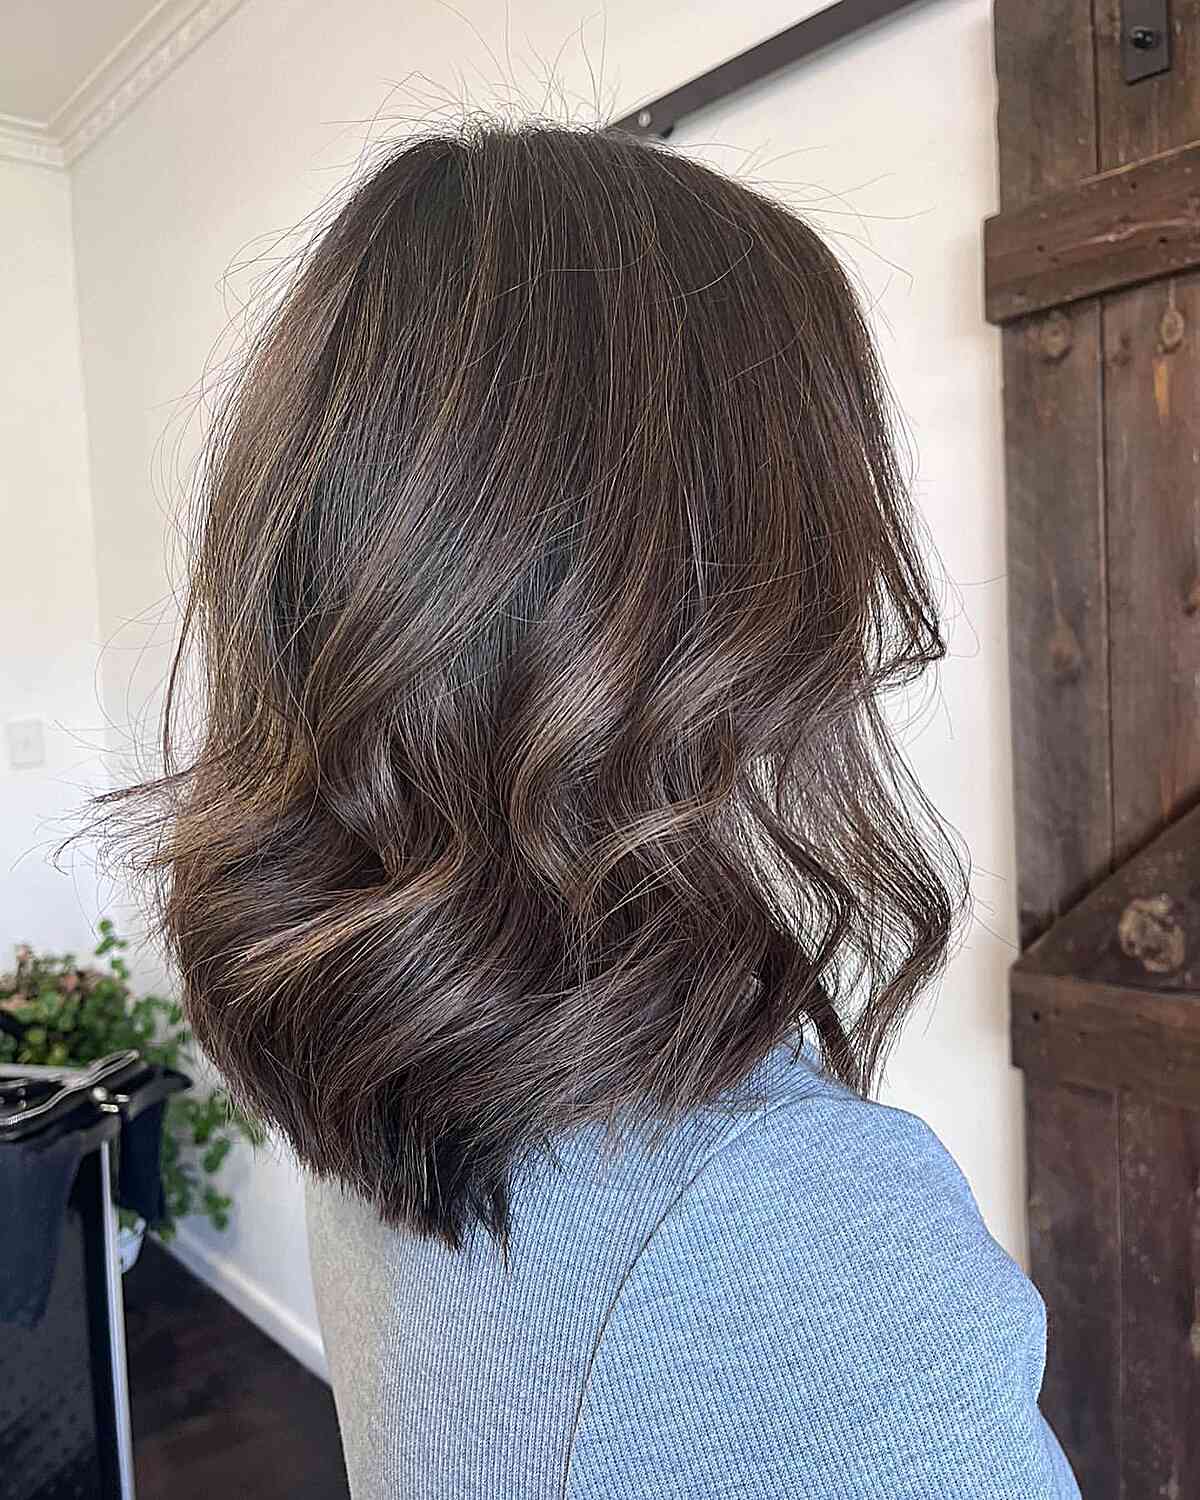 Chestnut Brown with Textured Layers